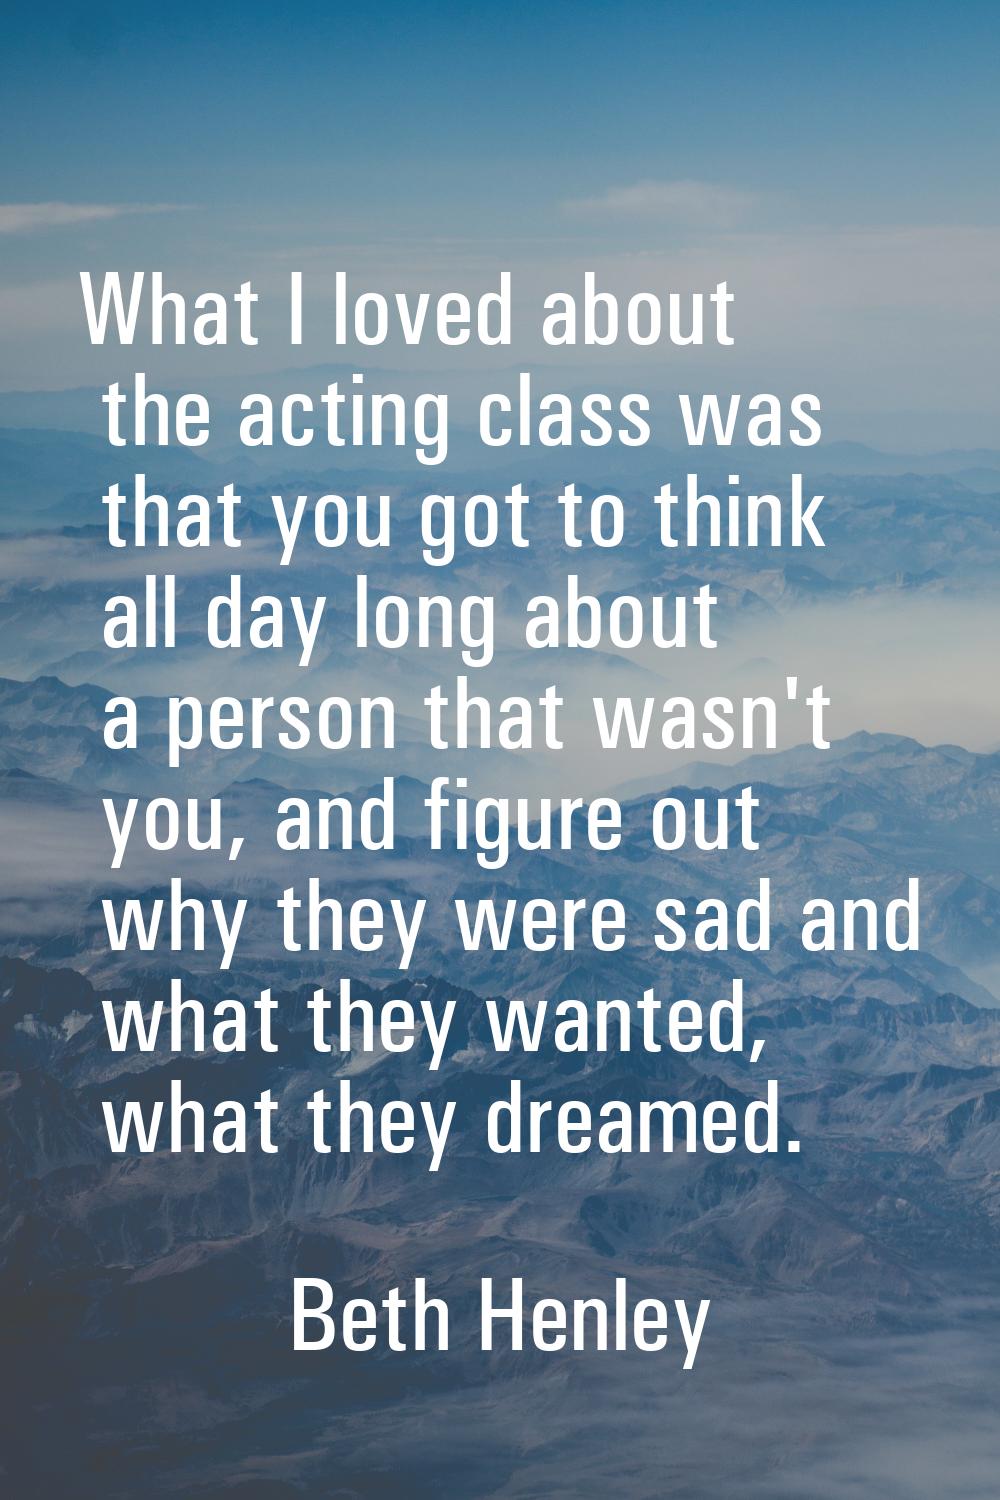 What I loved about the acting class was that you got to think all day long about a person that wasn